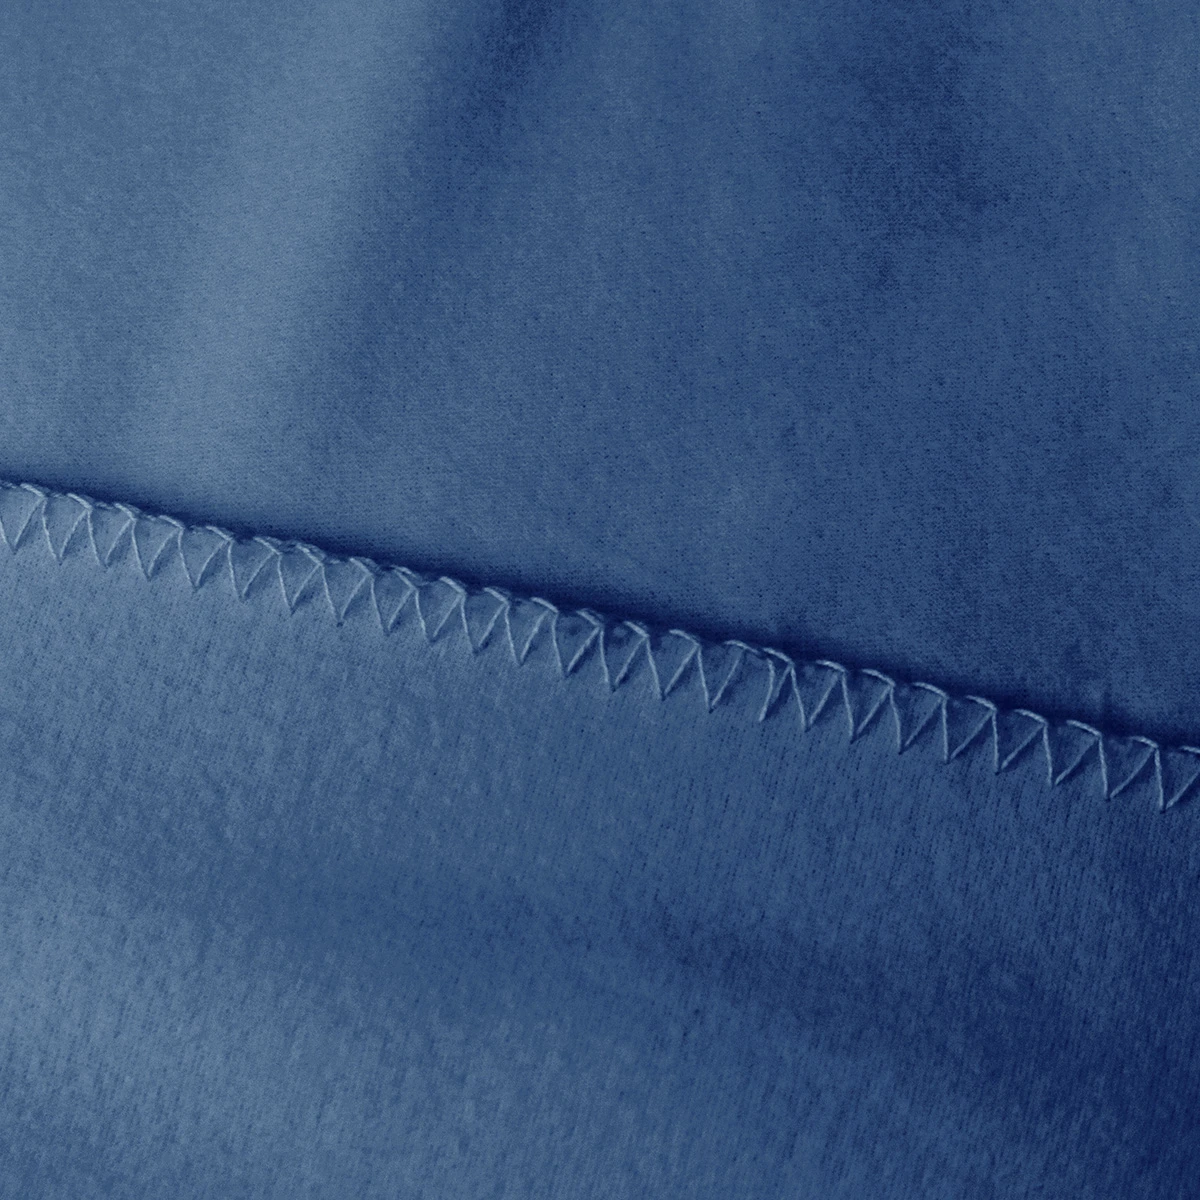 Solid Color Fleece Throw (Navy) - Whipstitch Edging